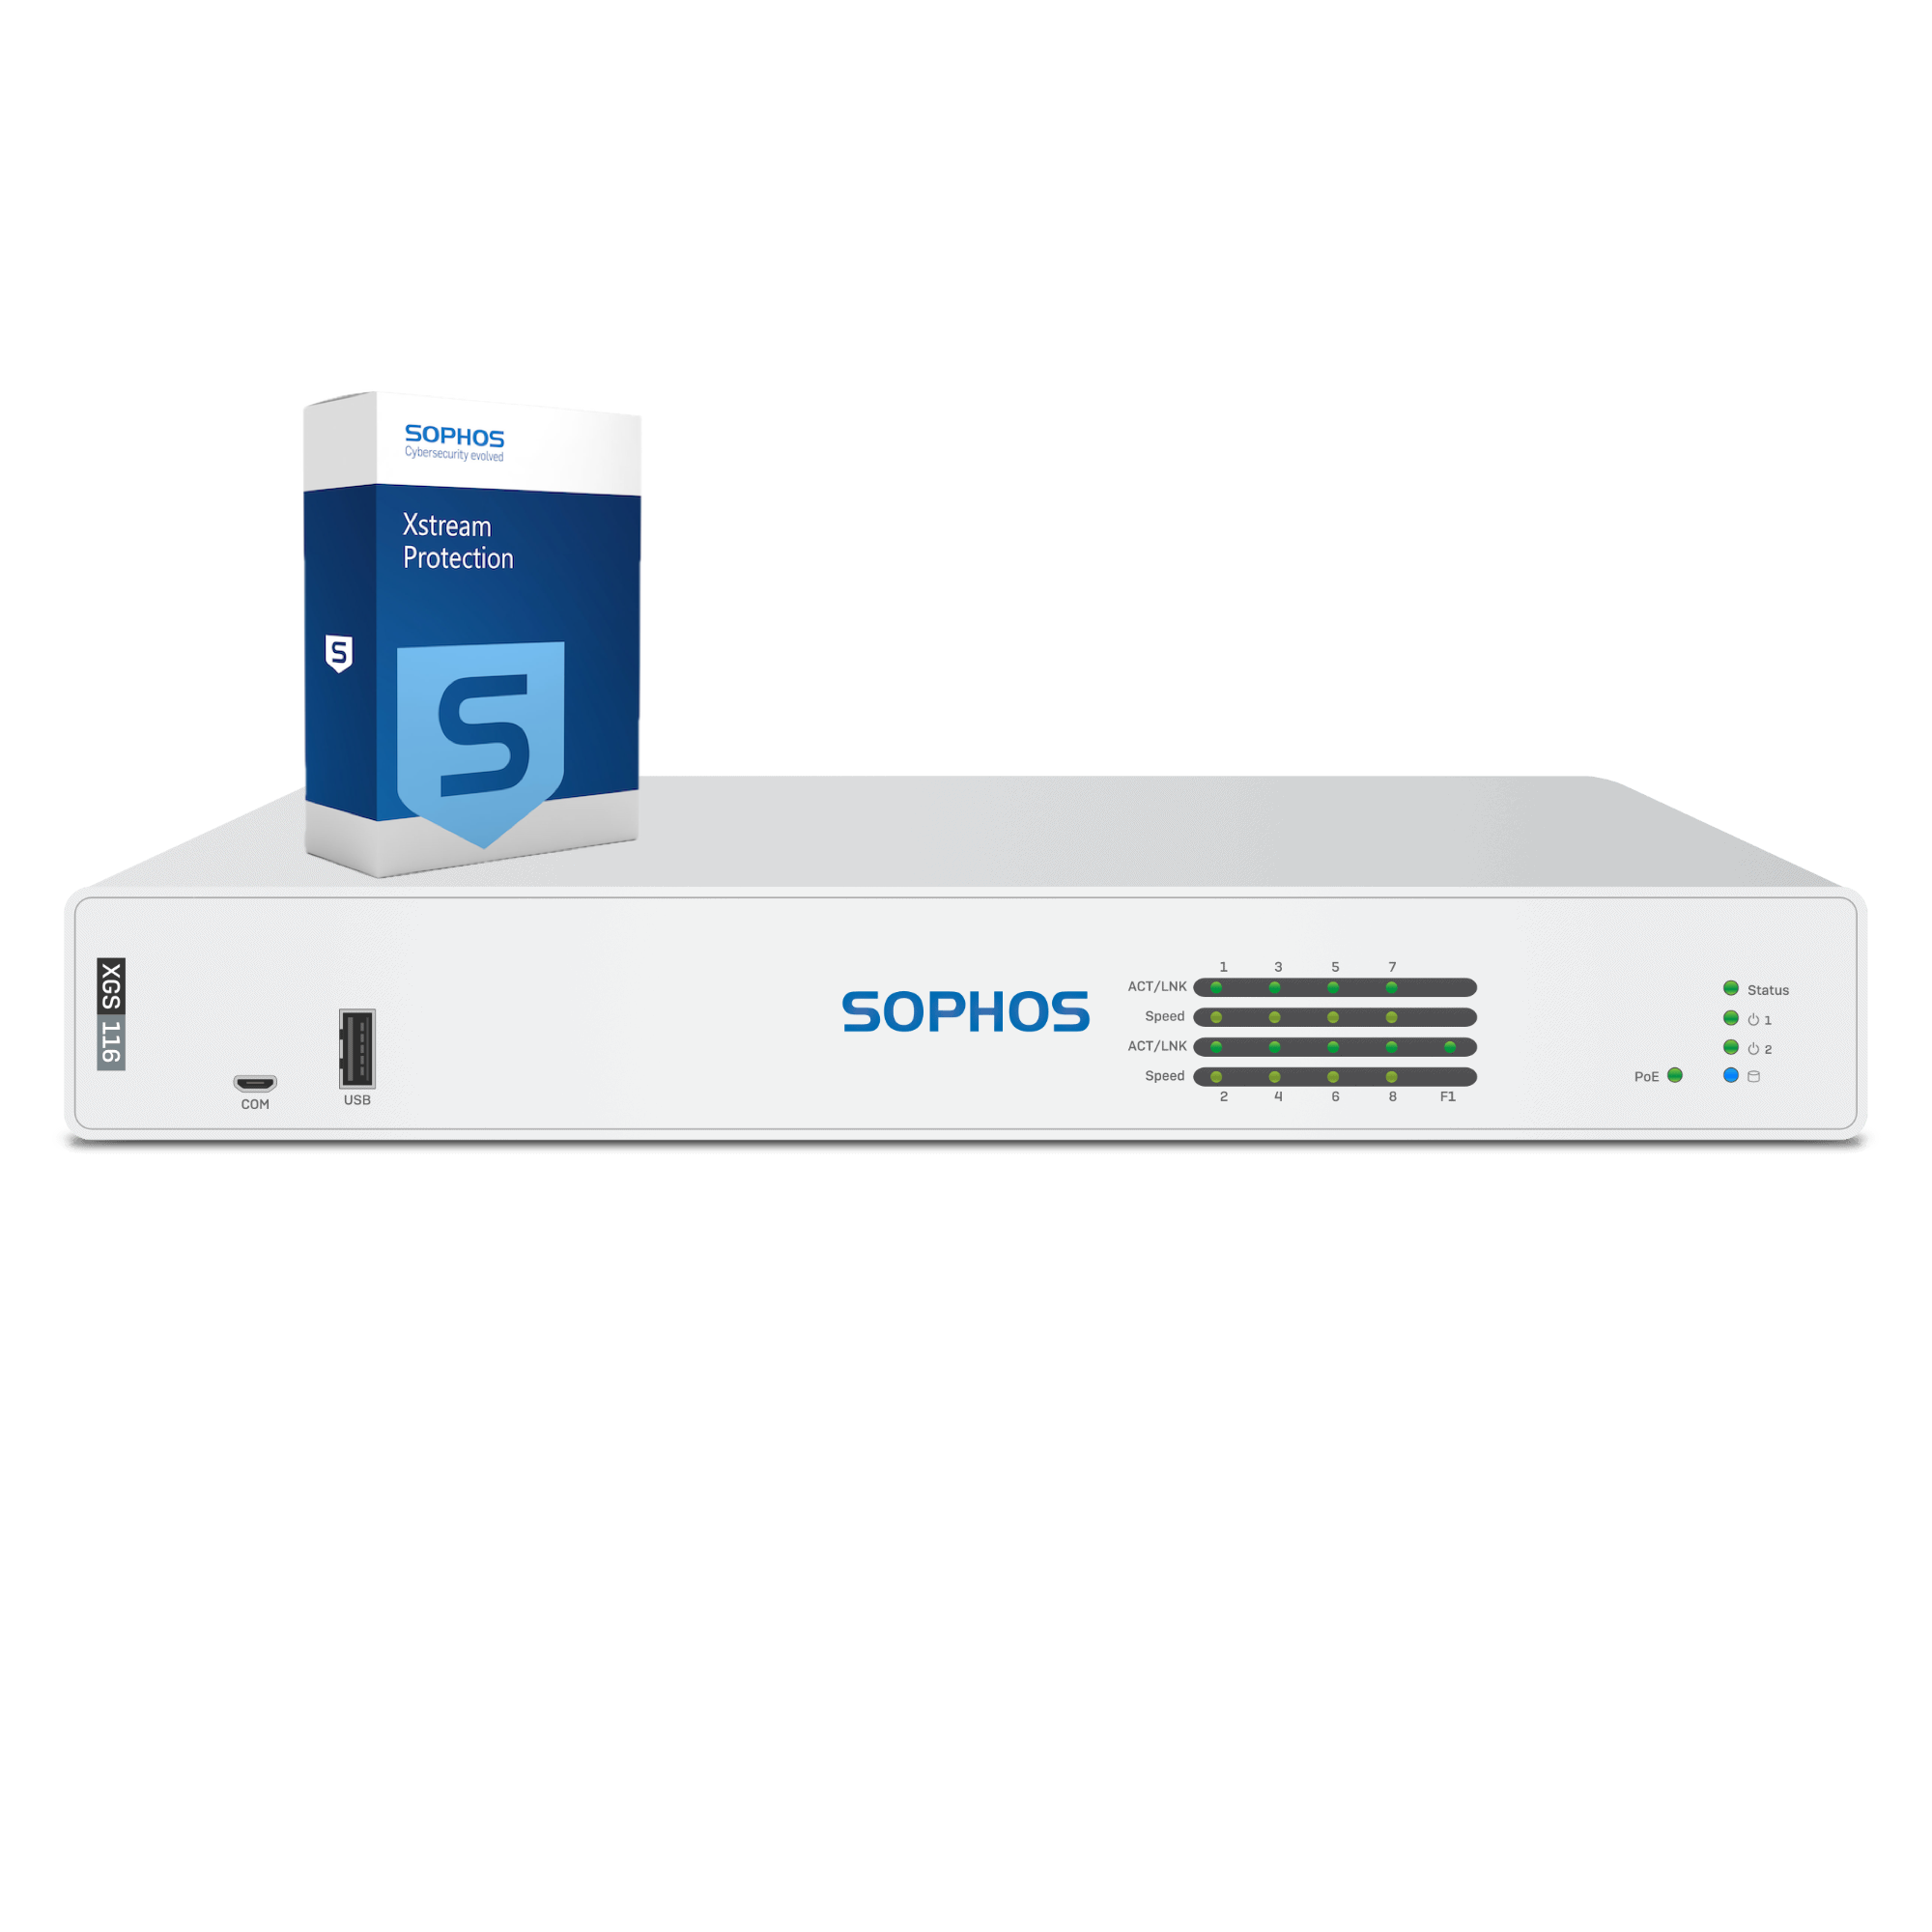 Sophos XGS 116 Firewall with Xstream Protection, 3-year - EU power cord